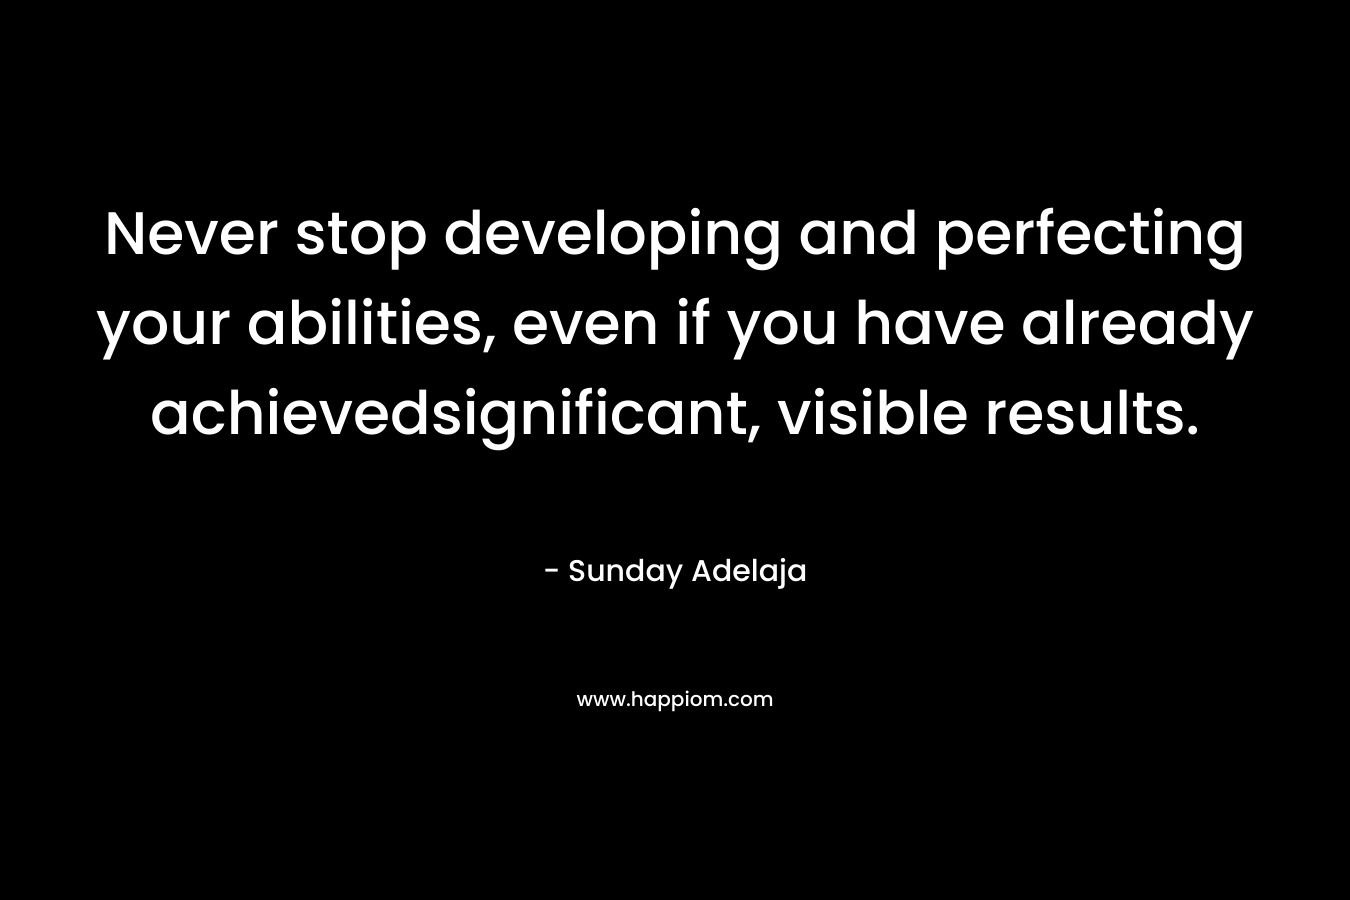 Never stop developing and perfecting your abilities, even if you have already achievedsignificant, visible results. – Sunday Adelaja